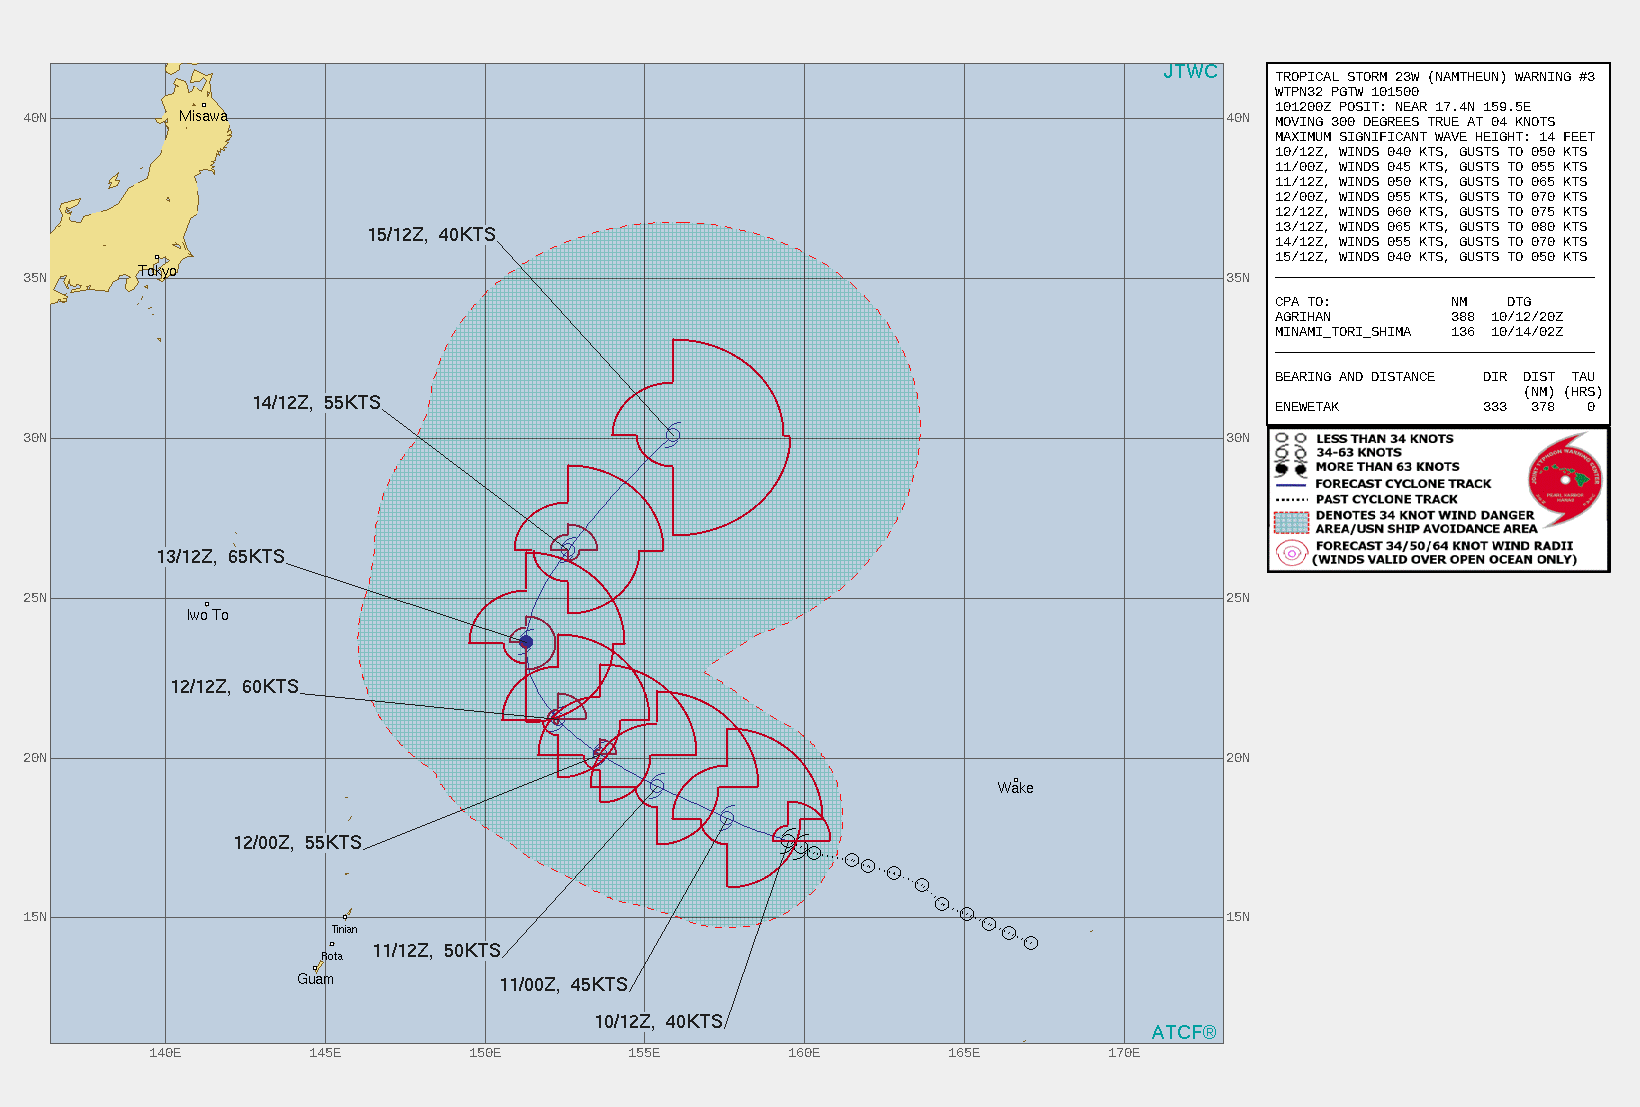 FORECAST REASONING.  SIGNIFICANT FORECAST CHANGES: THERE ARE NO SIGNIFICANT CHANGES TO THE FORECAST FROM THE PREVIOUS WARNING.  FORECAST DISCUSSION: TS NAMTHEUN WILL CONTINUE ON ITS CURRENT TRACK UP TO 48H. AFTERWARD, A SECONDARY SUBTROPICAL RIDGE(STR) TO THE EAST-SOUTHEAST WILL ASSUME STEERING AND DRIVE THE SYSTEM POLEWARD, CREST THE STR AXIS NEAR 72H, THEN RECURVE IT NORTHEASTWARD. THE FAVORABLE CONDITIONS  WILL PROMOTE A STEADY INTENSIFICATION TO A PEAK OF 65KNOTS/CAT 1 BY 72H.  AFTERWARD, INCREASING VERTICAL WIND SHEAR AND COOLING SSTS WILL GRADUALLY DECAY THE  SYSTEM DOWN TO 40KNOTS BY 120H.